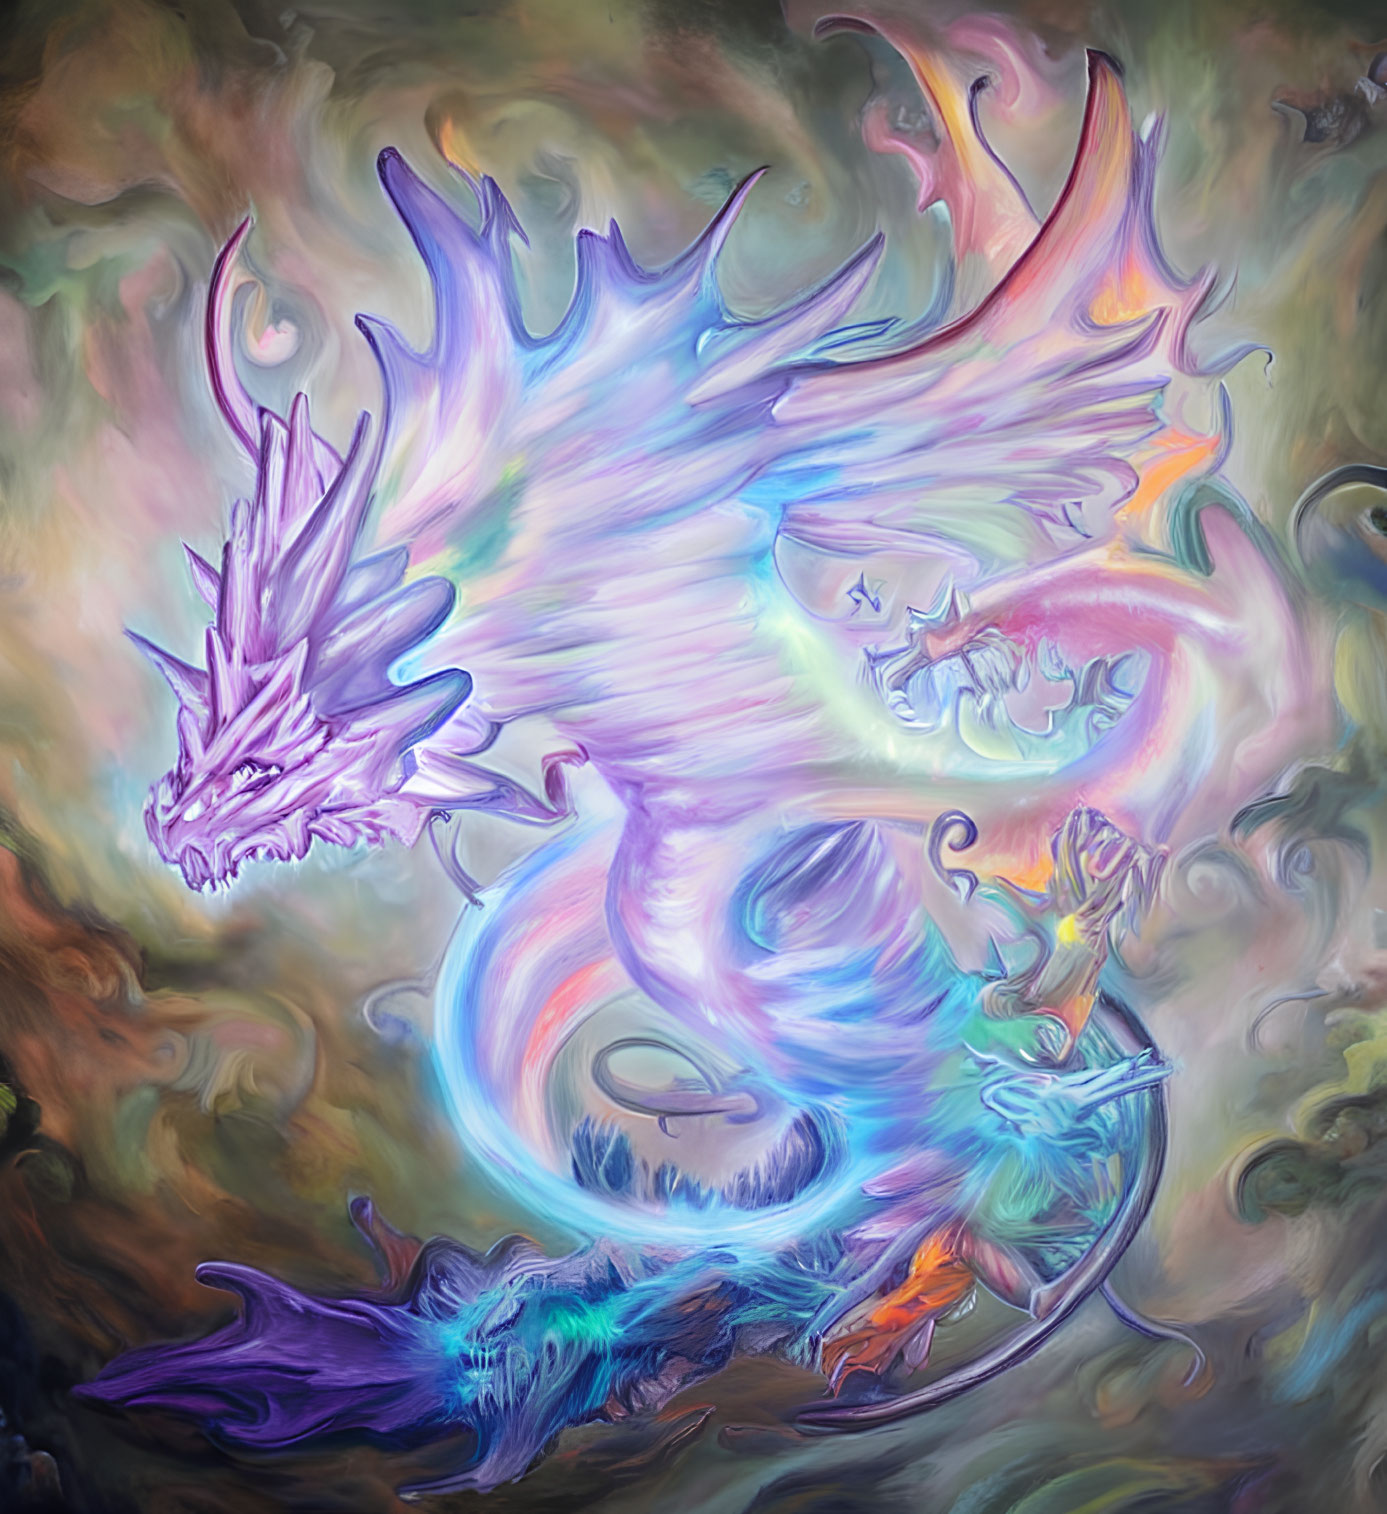 Mythical dragon digital painting with iridescent wings in colorful clouds